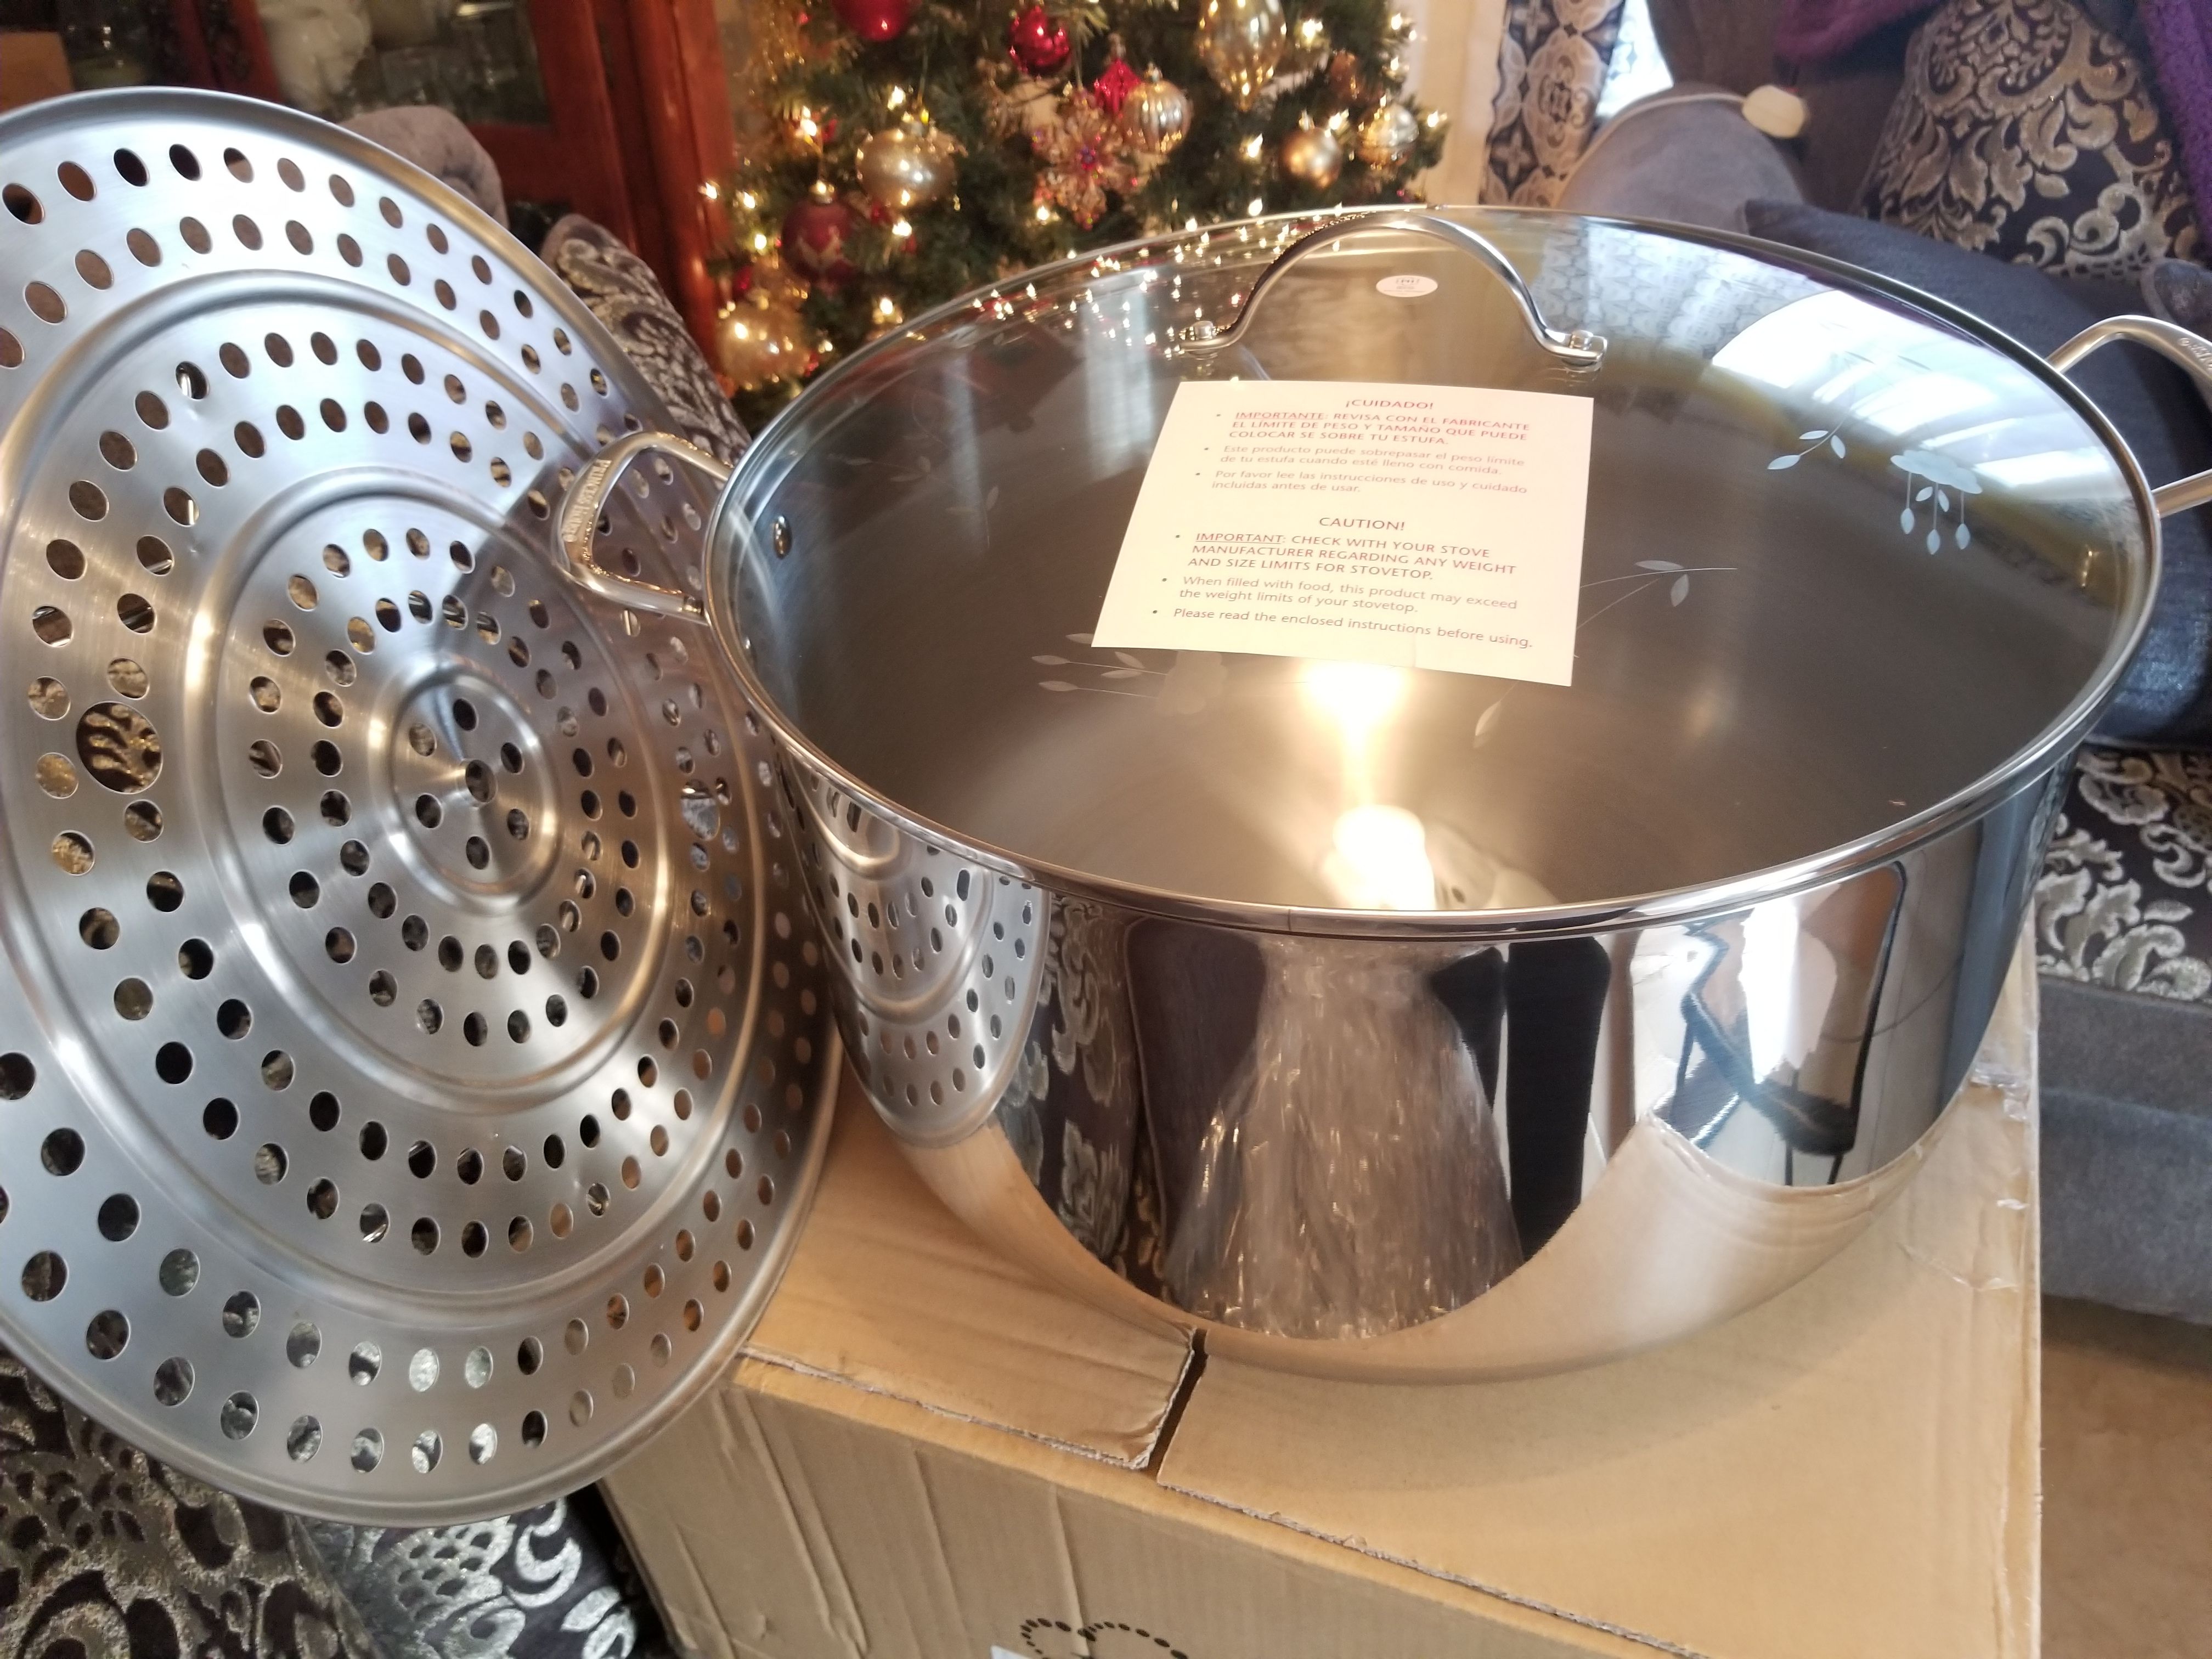 Princess House olla tamalera 32 qt acero inoxidable for Sale in Temecula,  CA - OfferUp